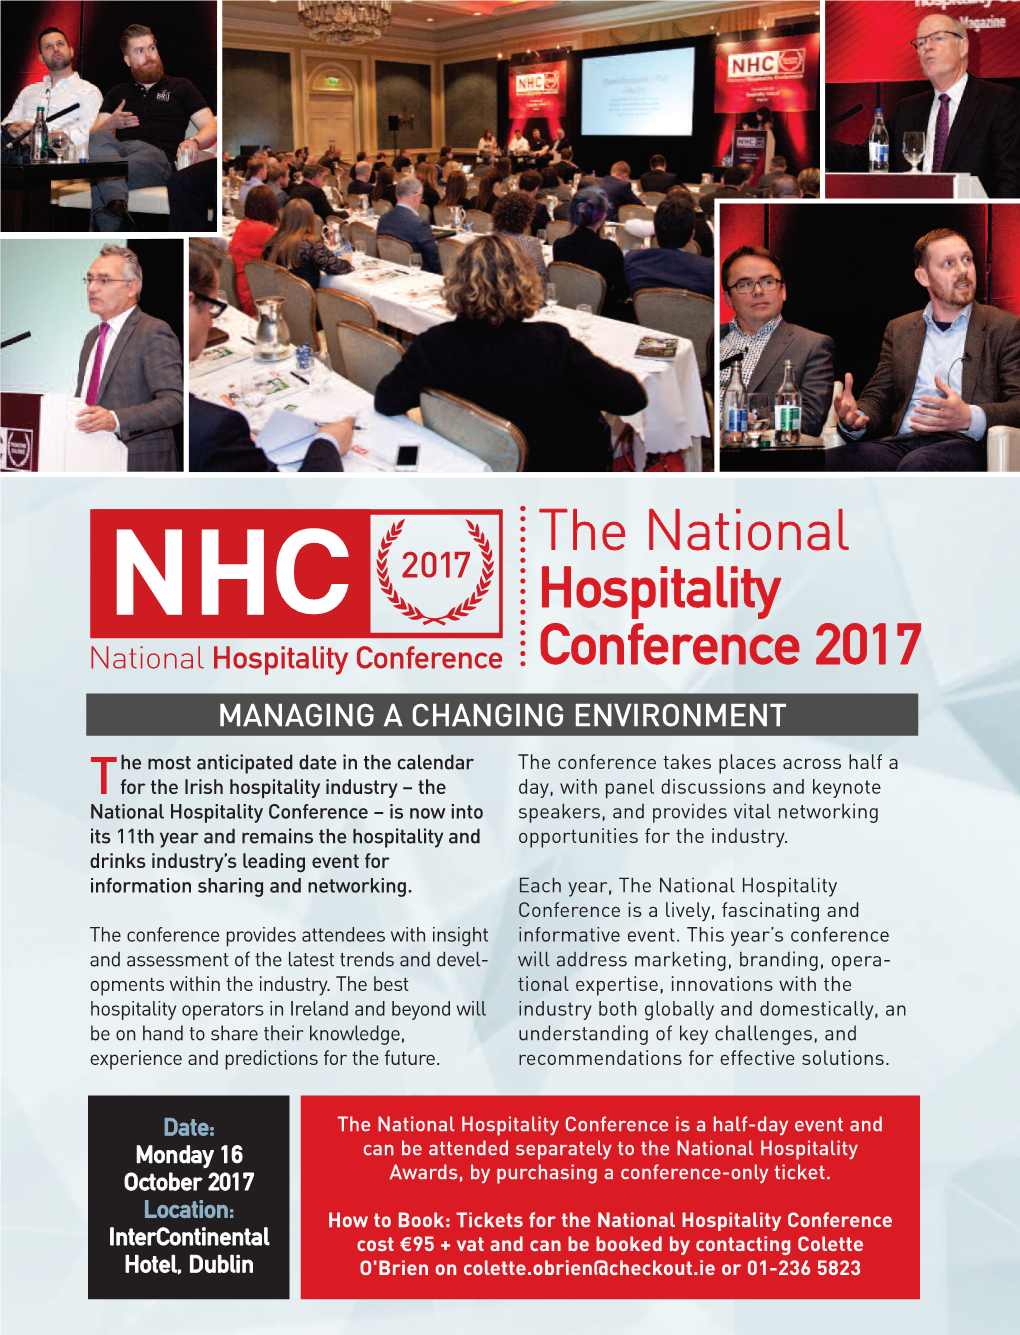 The National Hospitality Conference 2017